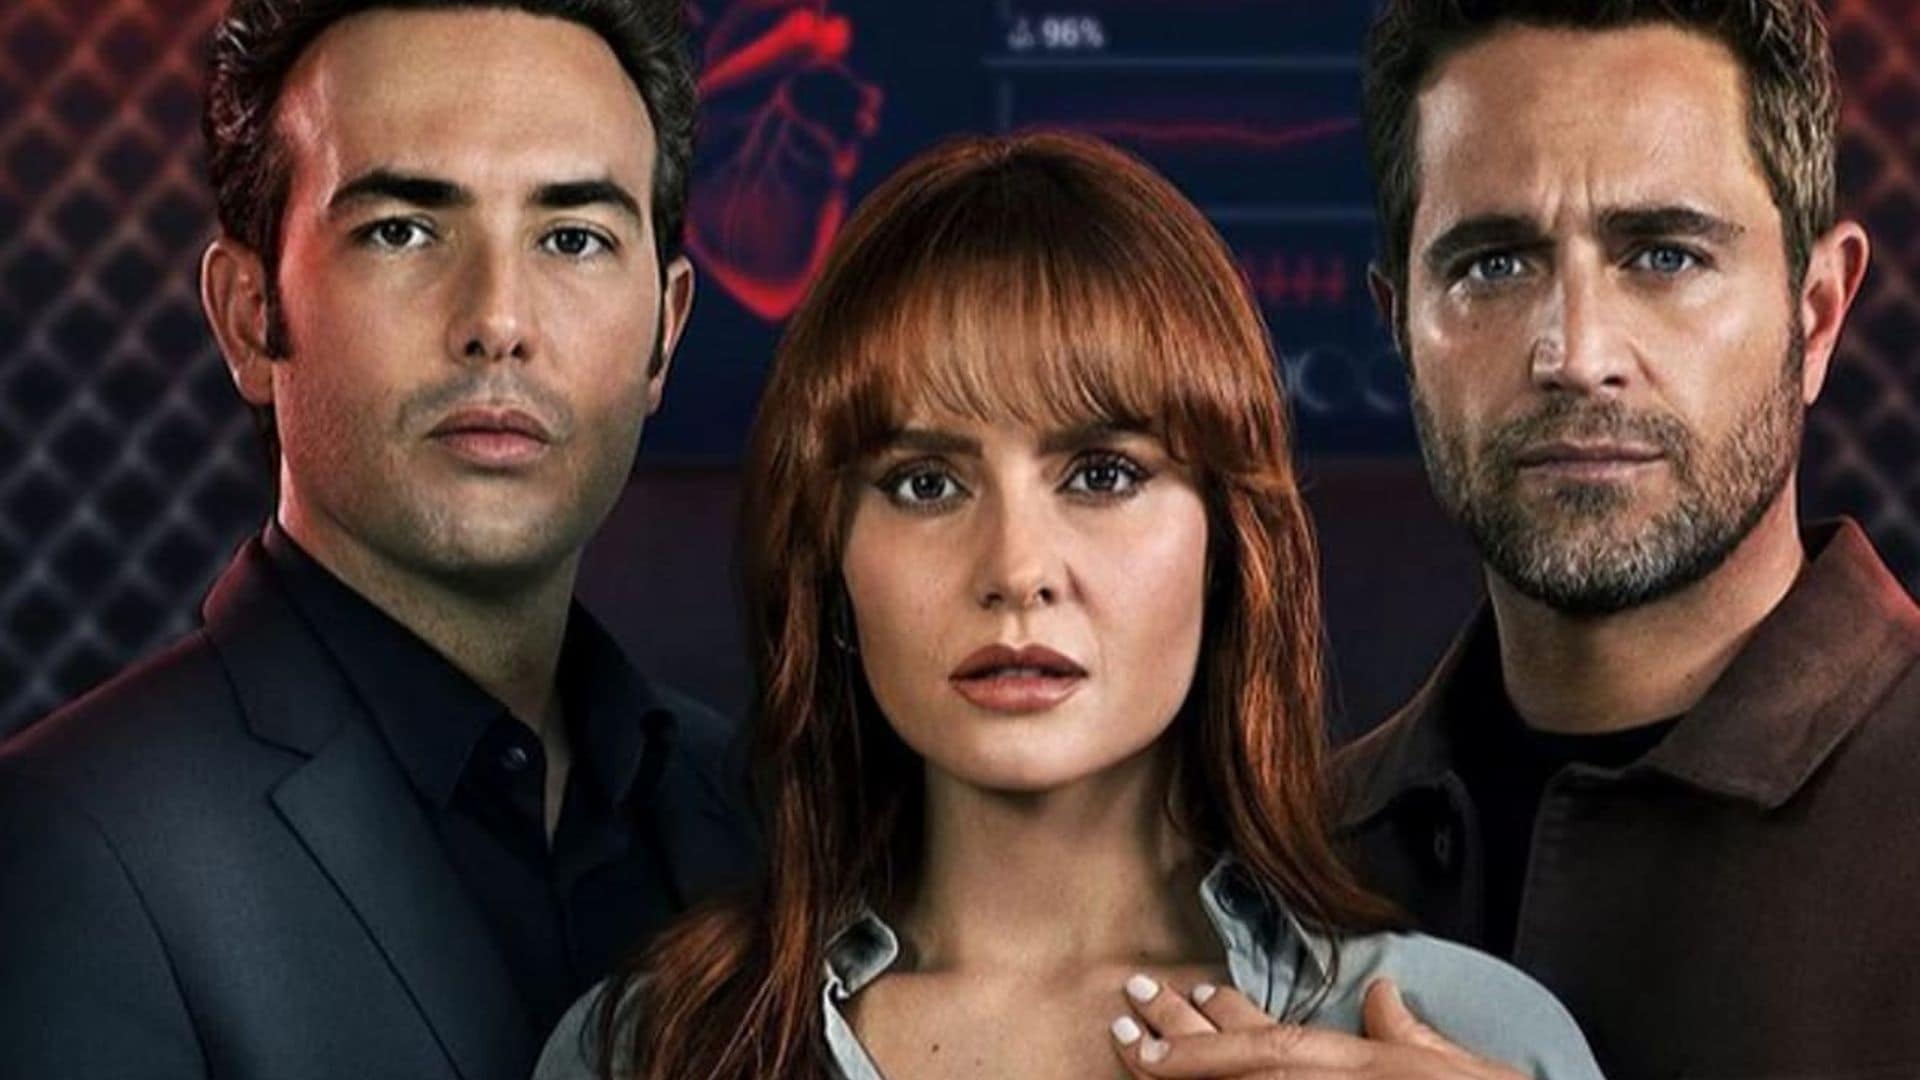 The Colombian telenovela ‘The Marked Heart’ is one of the most viewed shows on Netflix